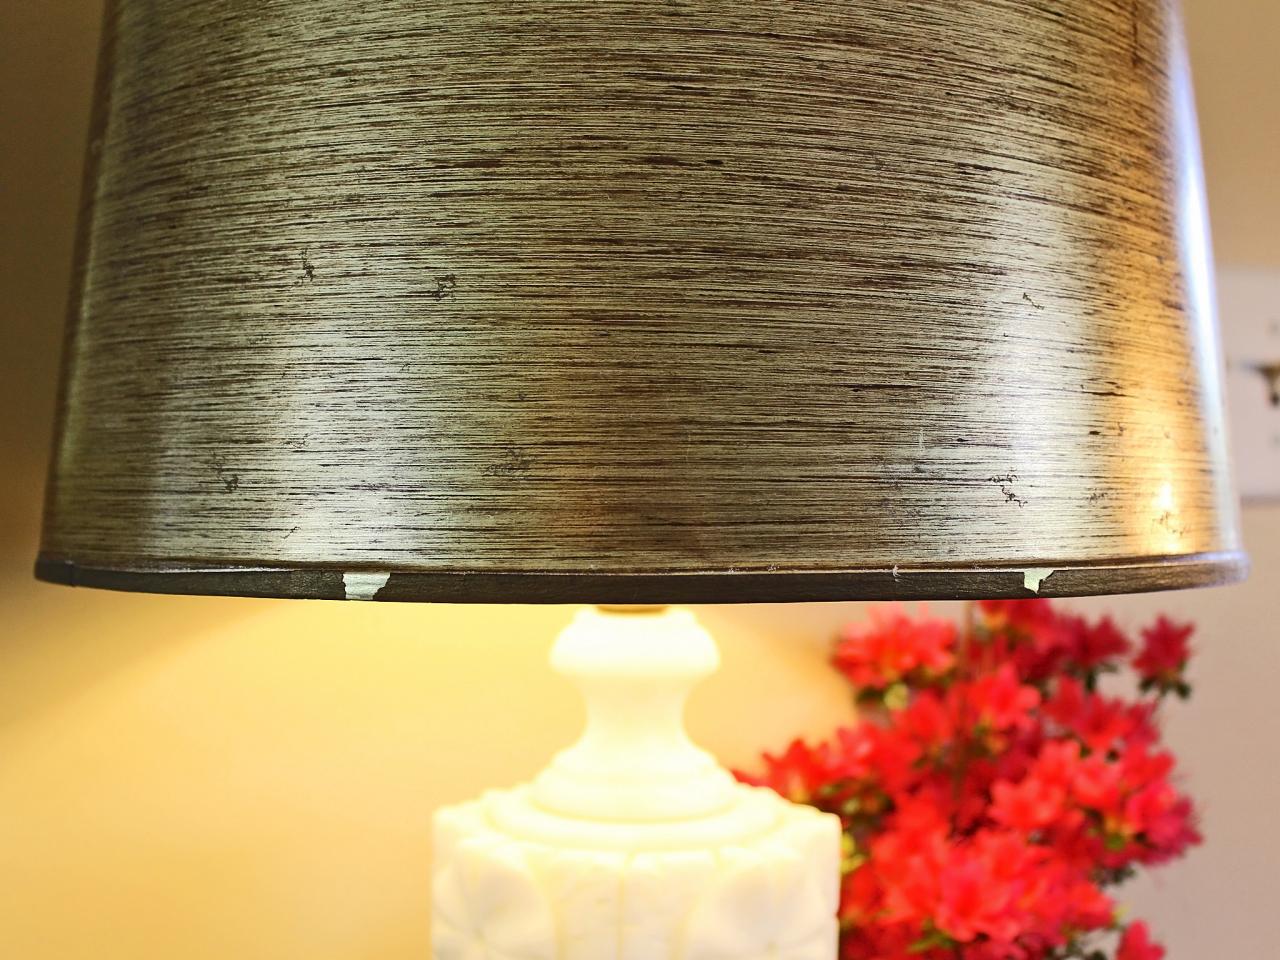 Easily Give An Old Lampshade A Trendy, How To Line Inside Of Lampshade